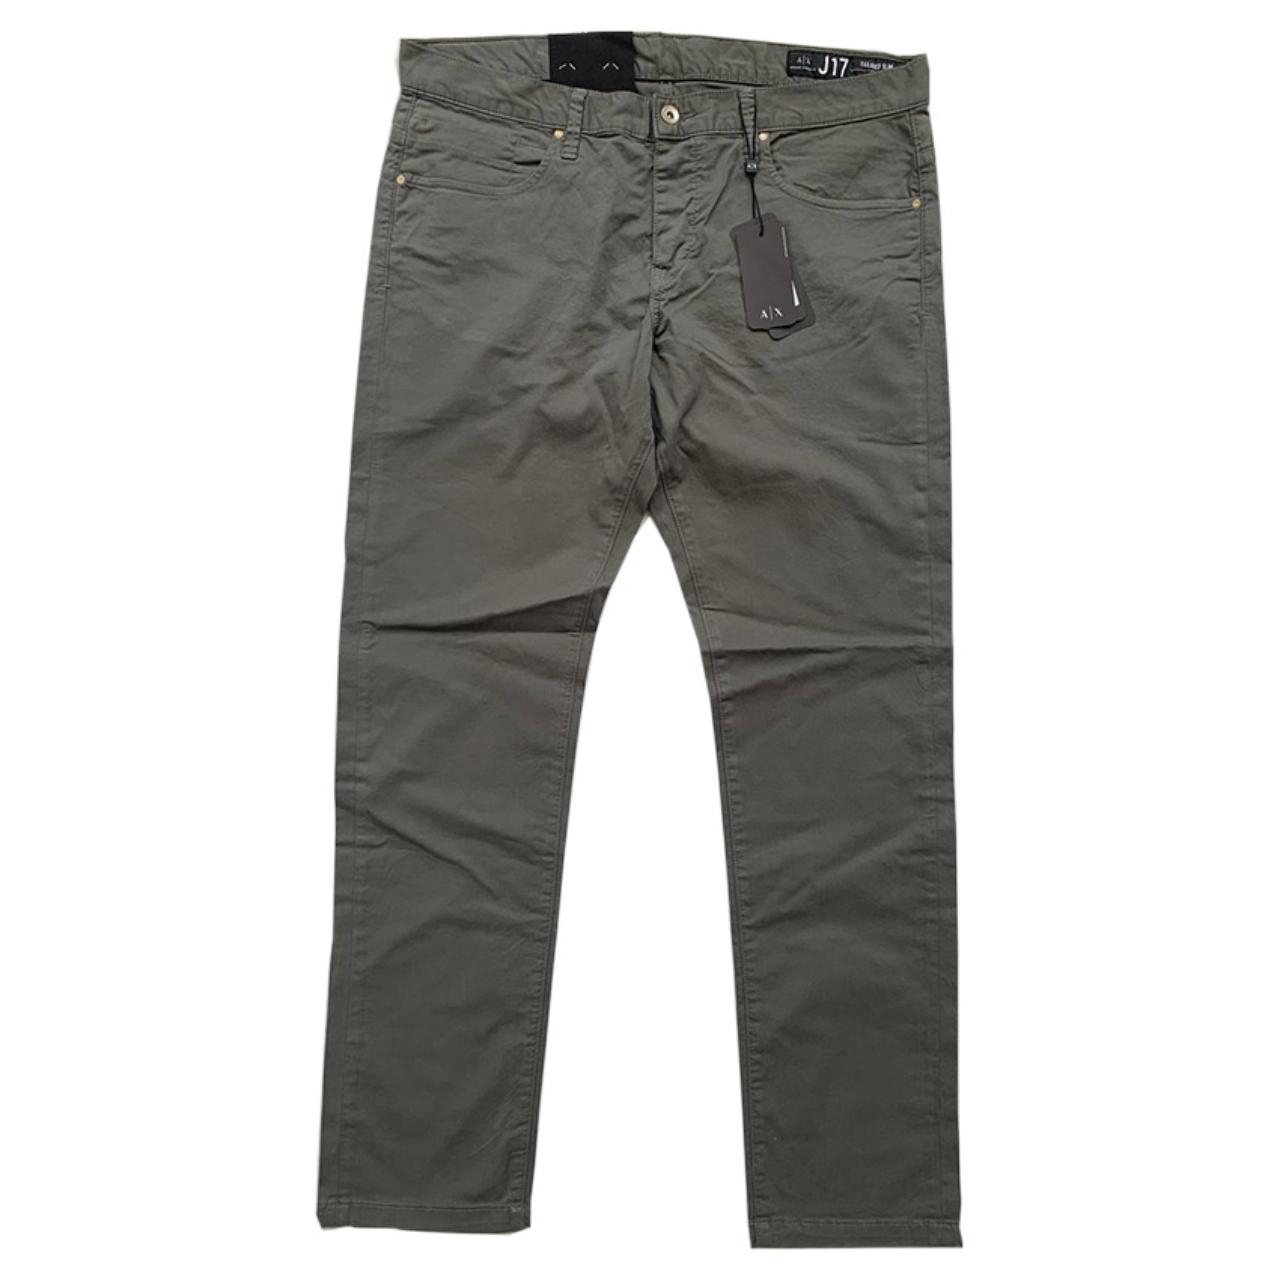 COTTON TROUSERS - Time Square Trading Co., Ltd.